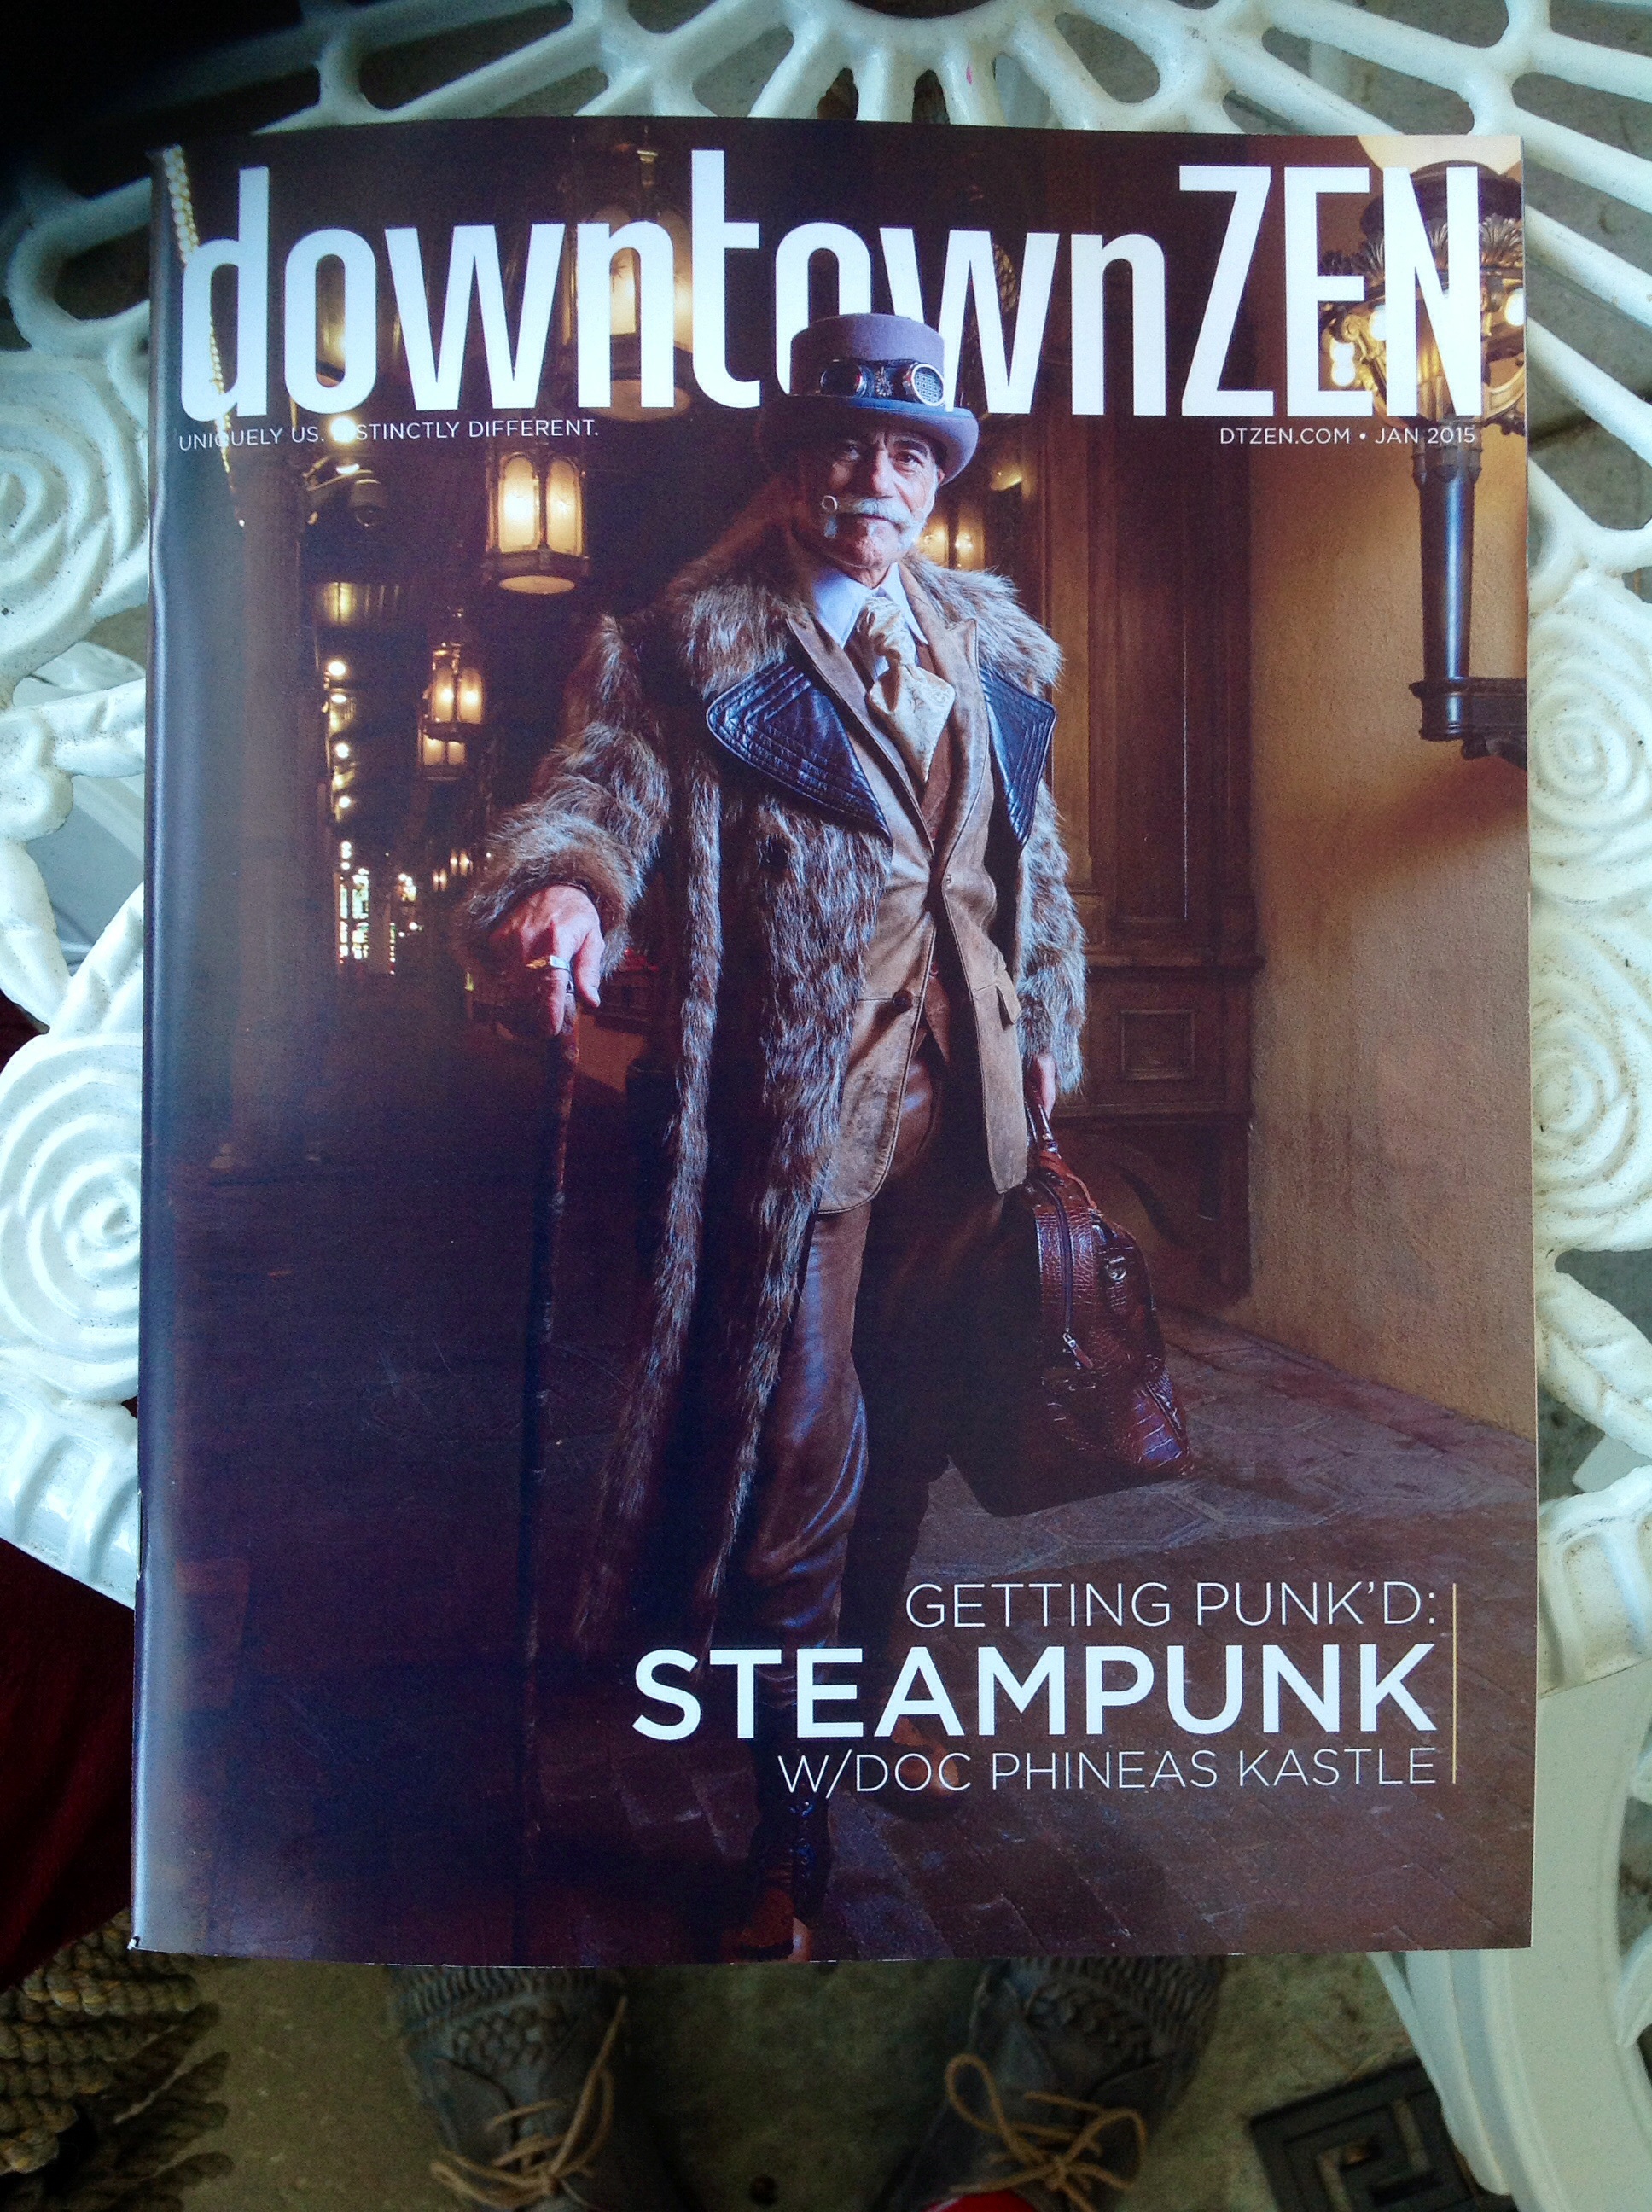 Doc Phineas gracing the cover of Downtown Zen Magazine Jan 2015 with a 13 page editorial of his mivies, his popularity on TV, and being the world face of the Steampunk movement. Produced worldwide by Zappos